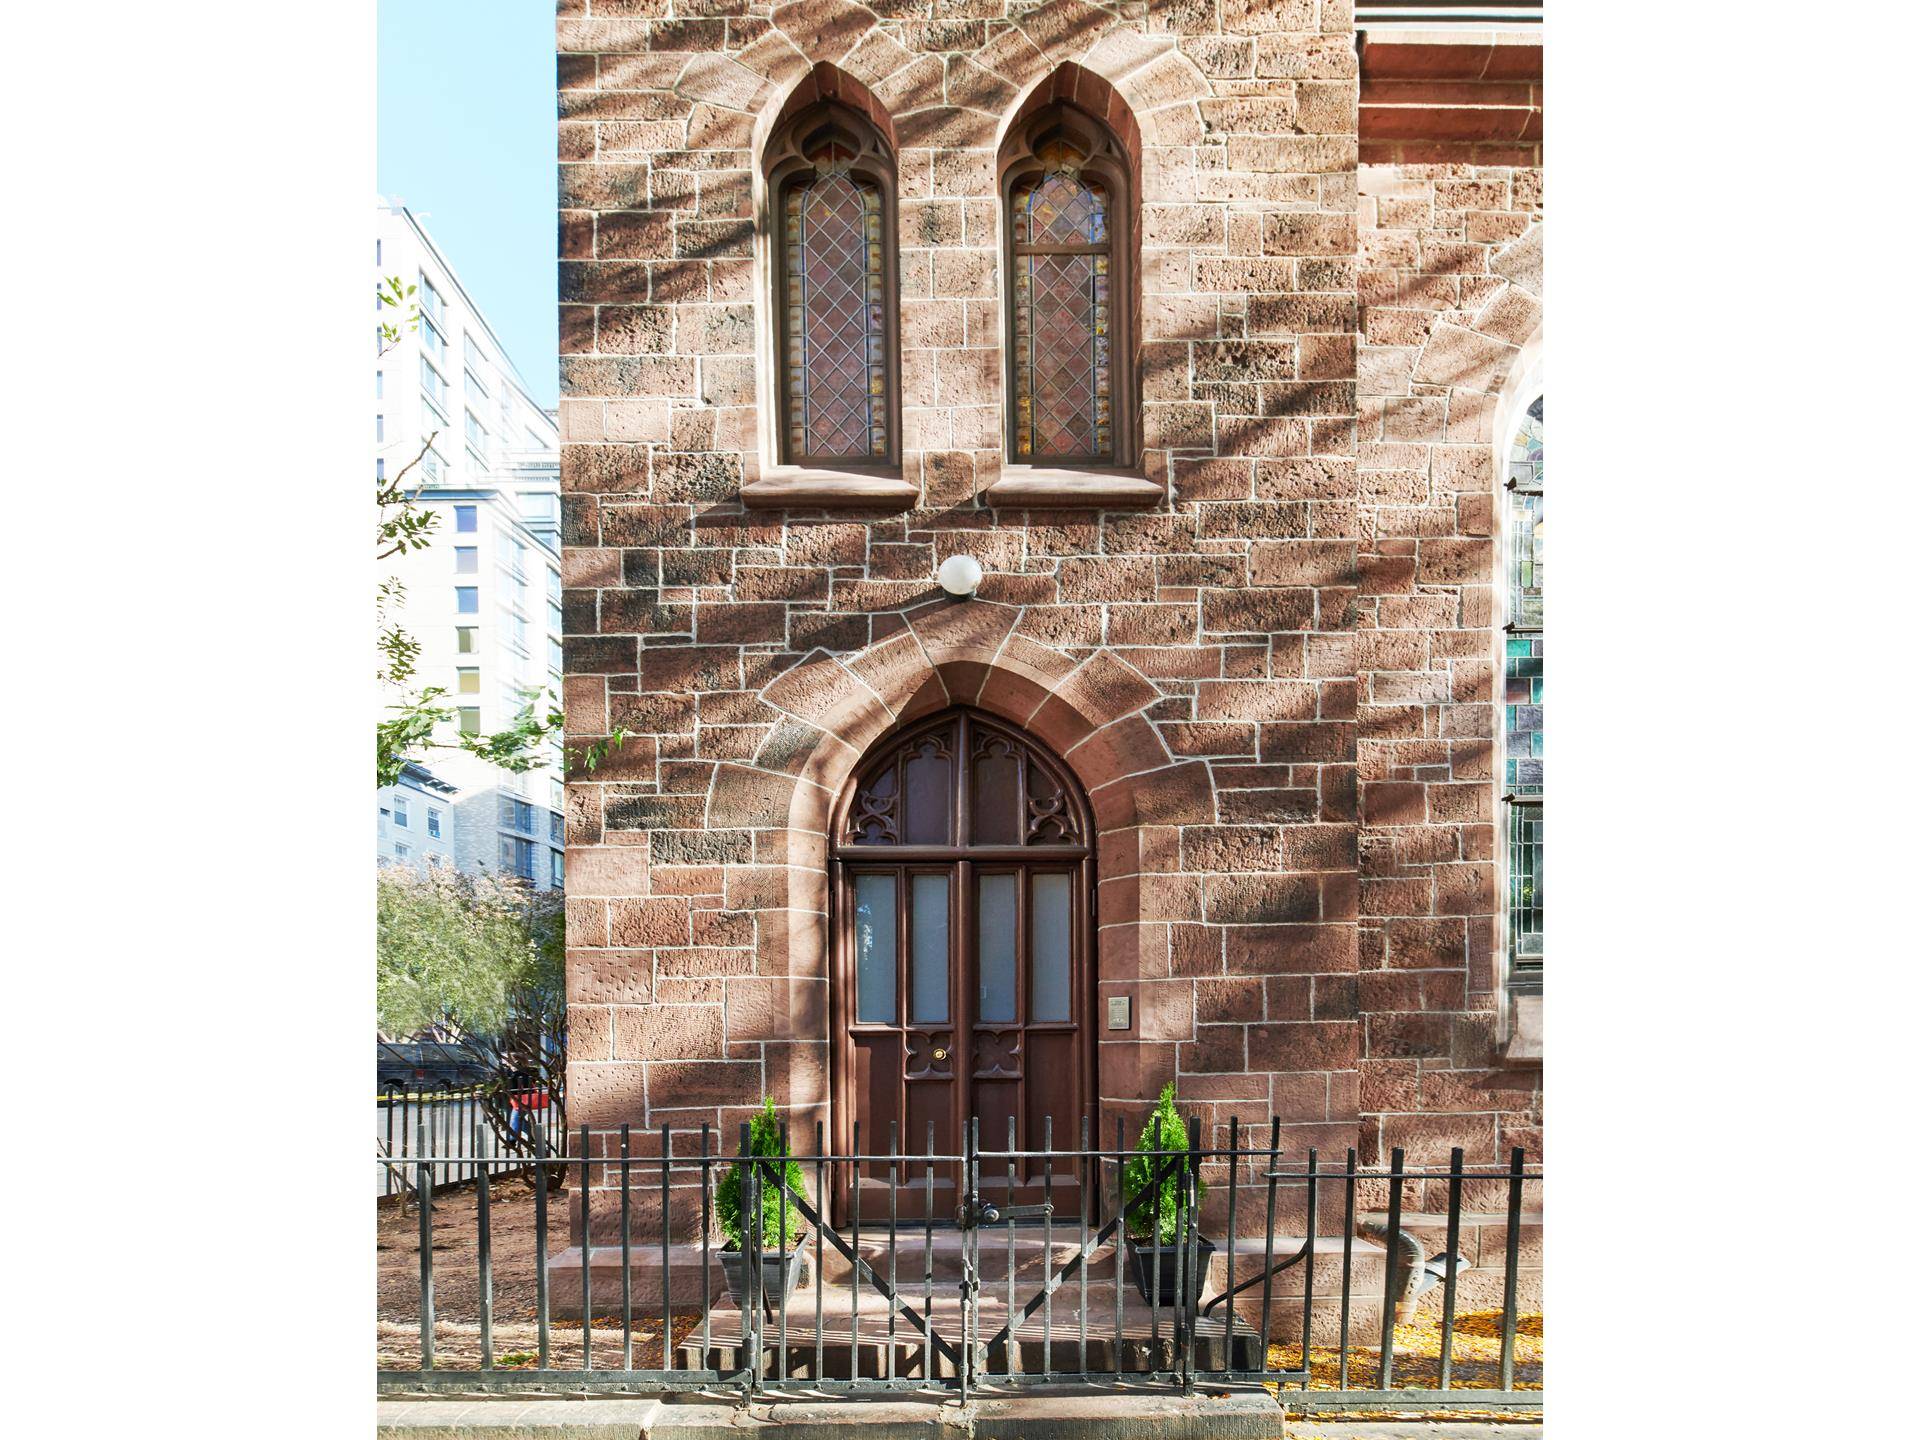 It is hard to miss the imposing stone edifice of this circa 1850 Gothic church regally situated in the heart of Brooklyn Heights.